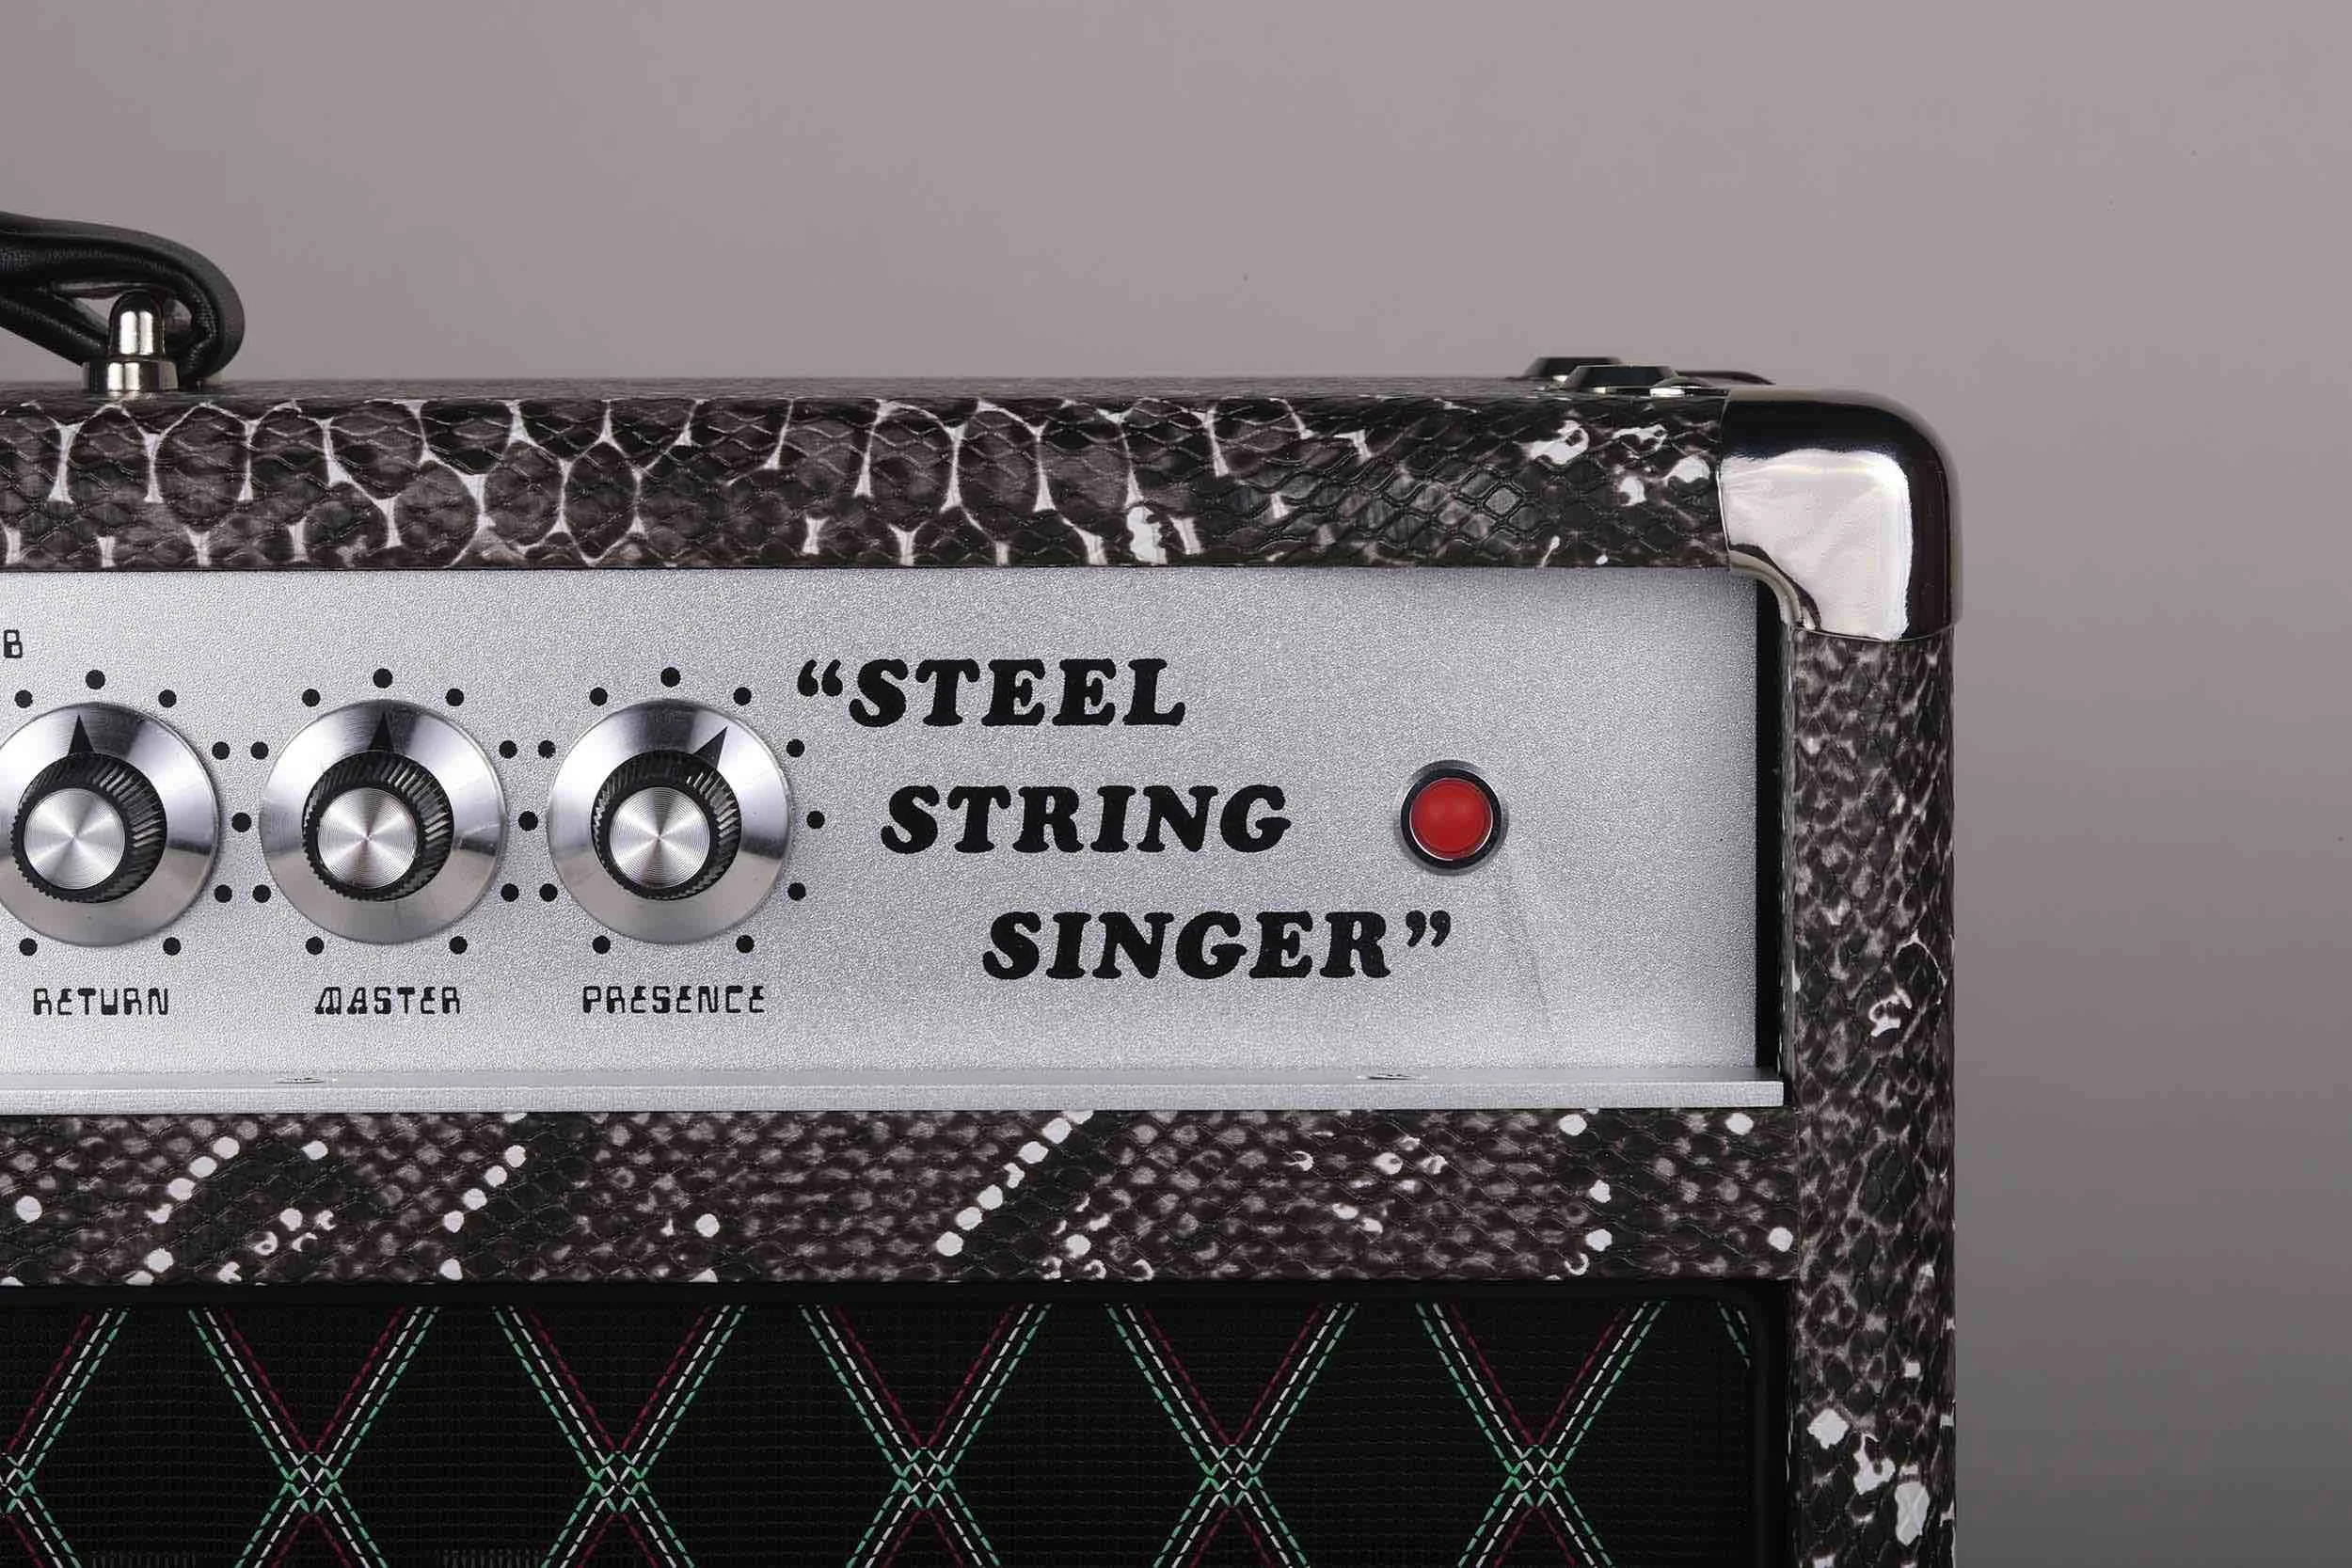 Custom Sss Steel String Singer Tone Deluxe Handwired Guitar Amp Head 100w With Snake Tolex Vox Grill Cloth - Electric Instrument Parts & Accessories - AliExpress